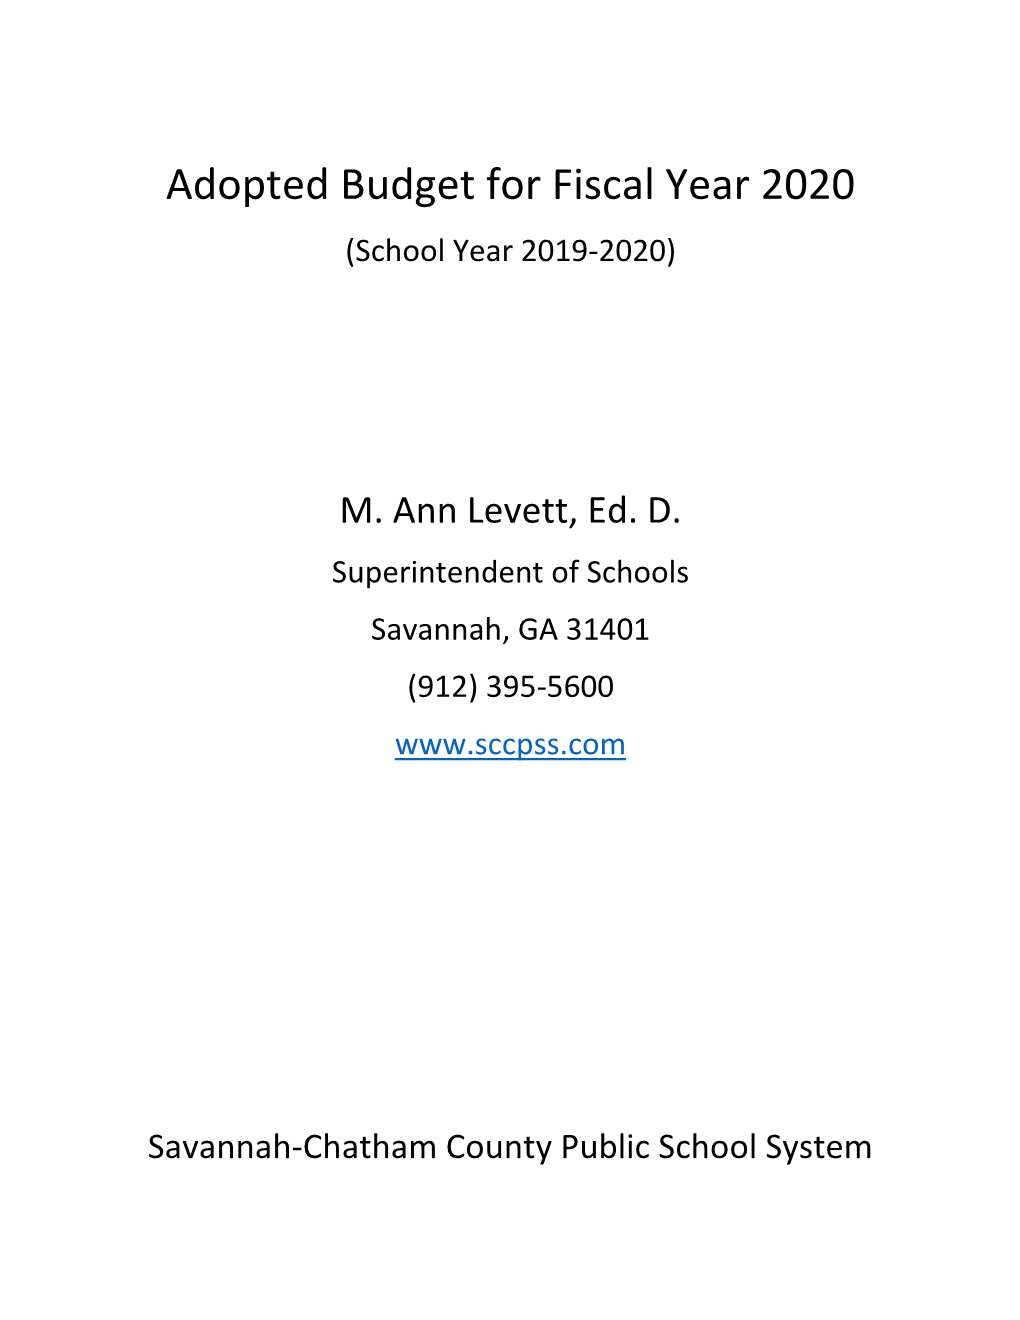 Adopted Budget for Fiscal Year 2020 (School Year 2019-2020)